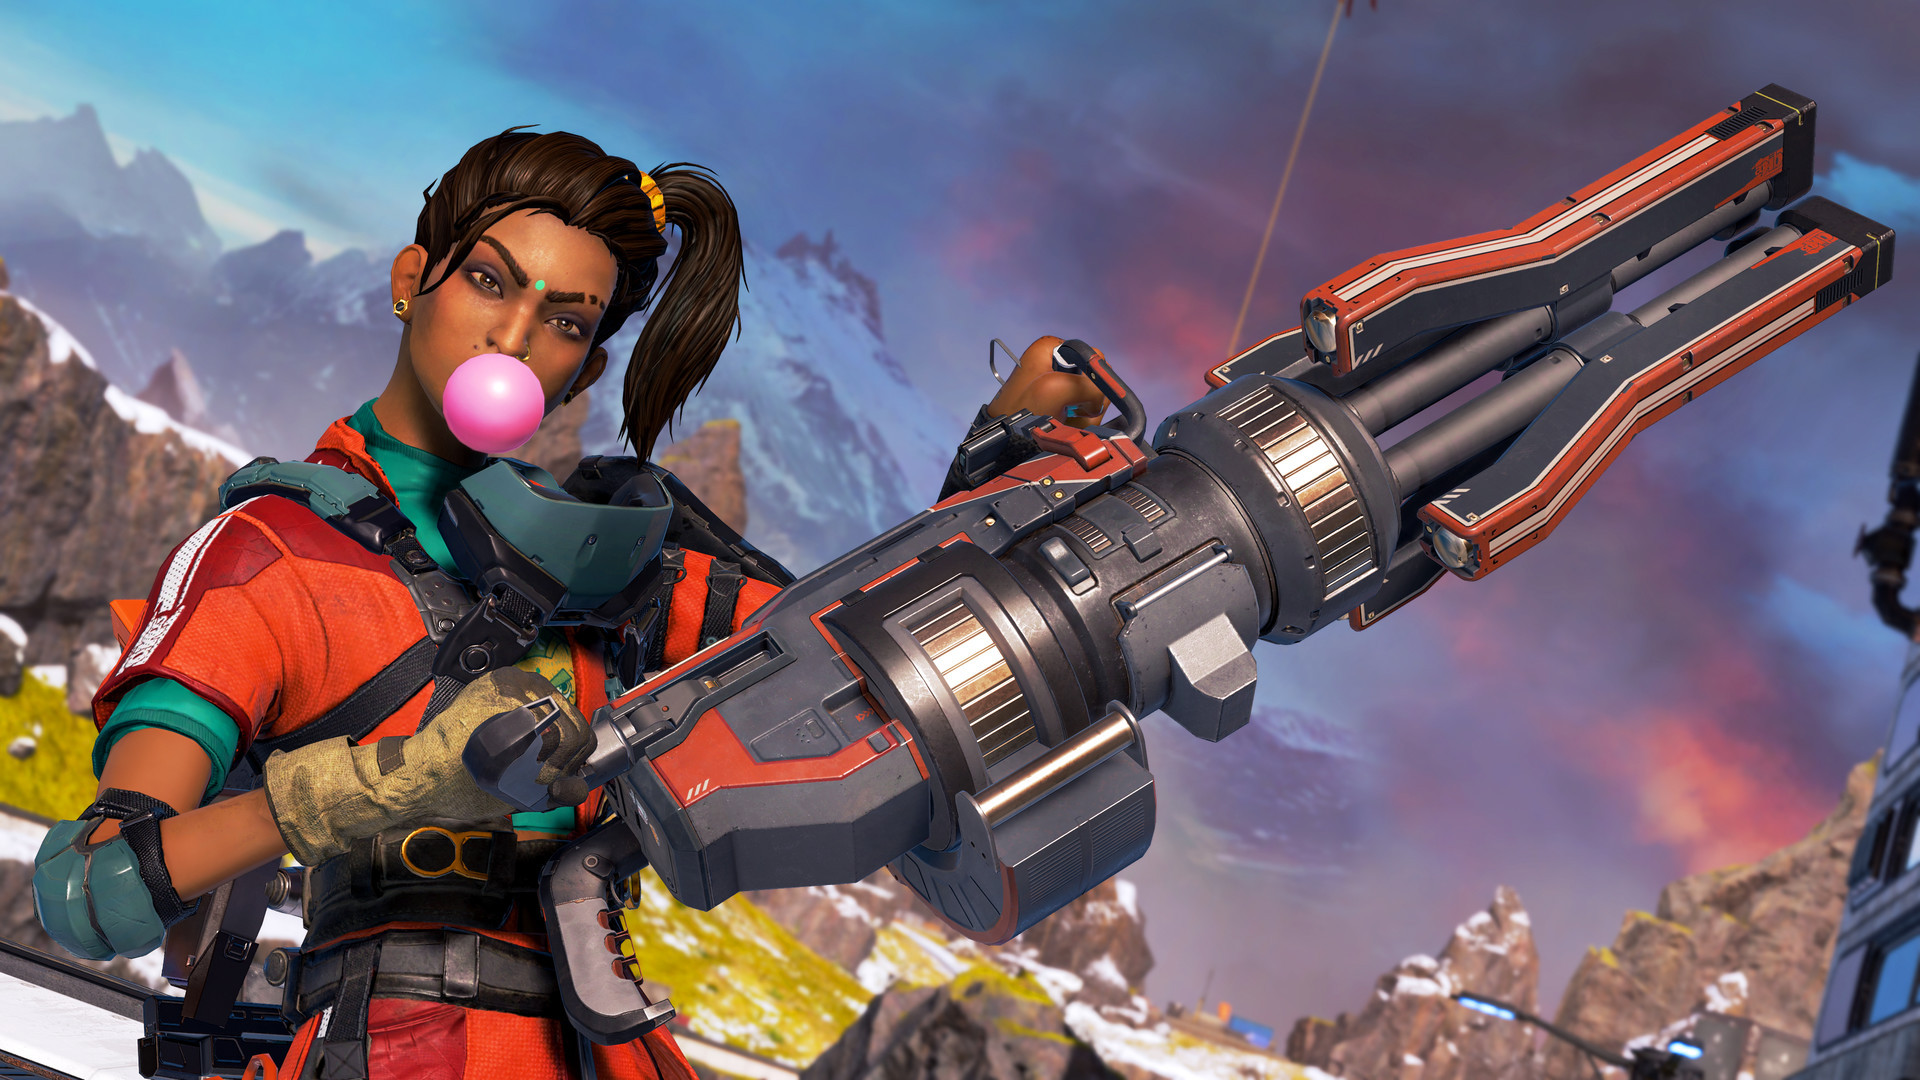 release date for apex legends on switch